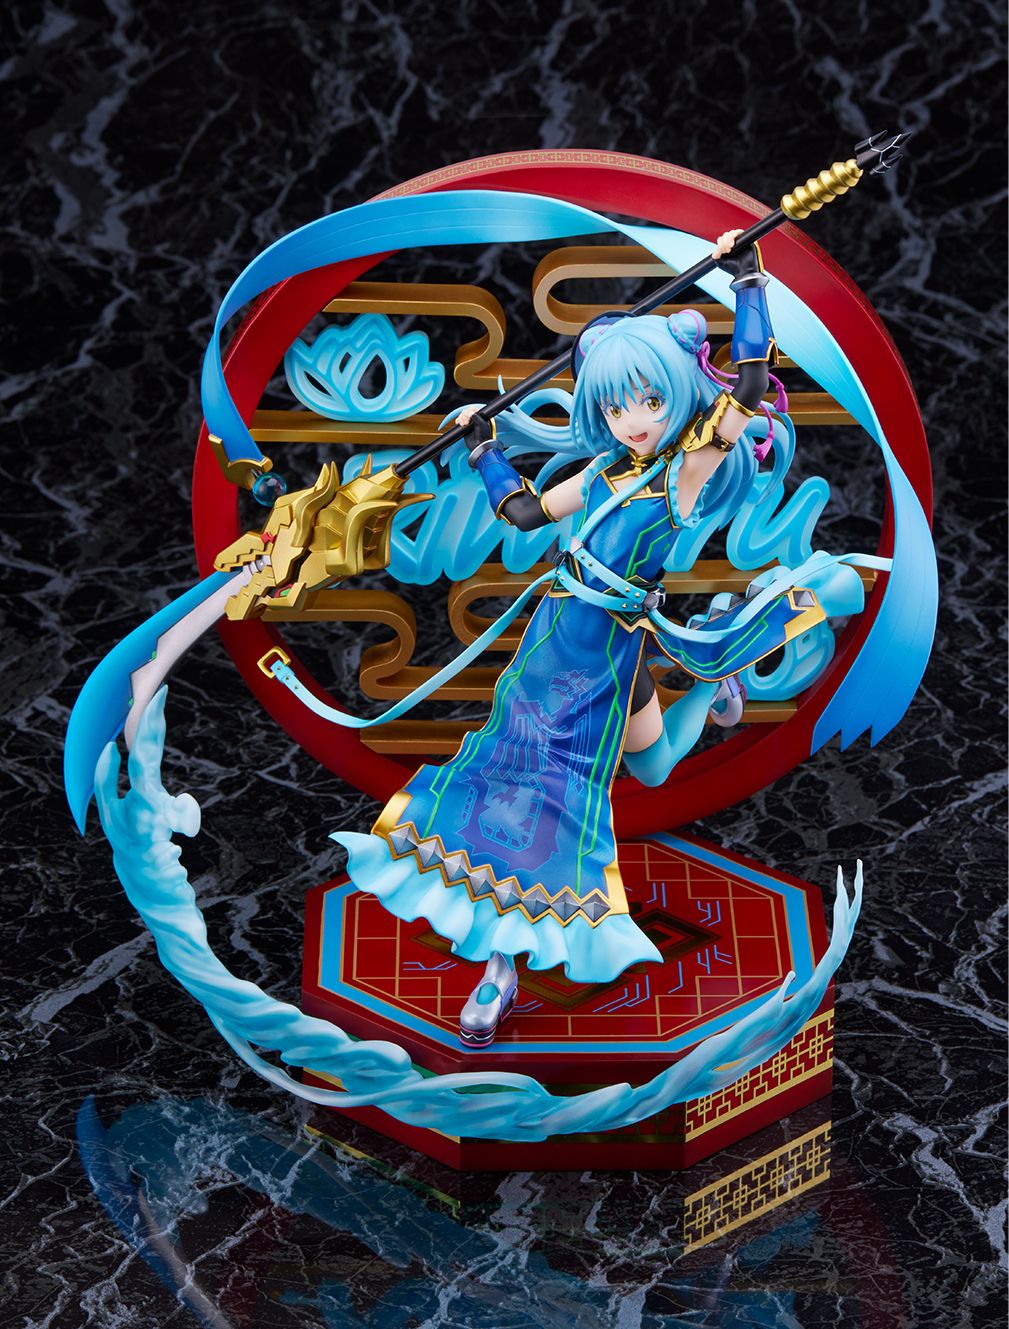 That Time I Got Reincarnated as a Slime Rimuru-Tempest -Busting Force Ver.- 1/7th Scale Figure | animota